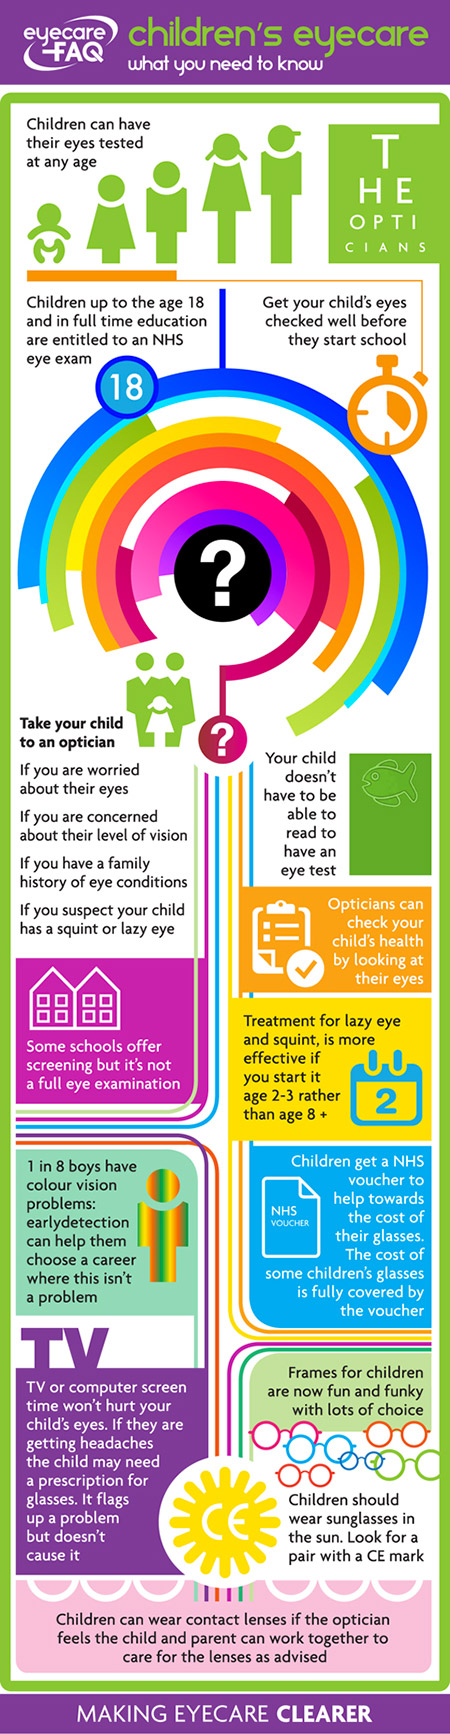 When should a child have an eye test